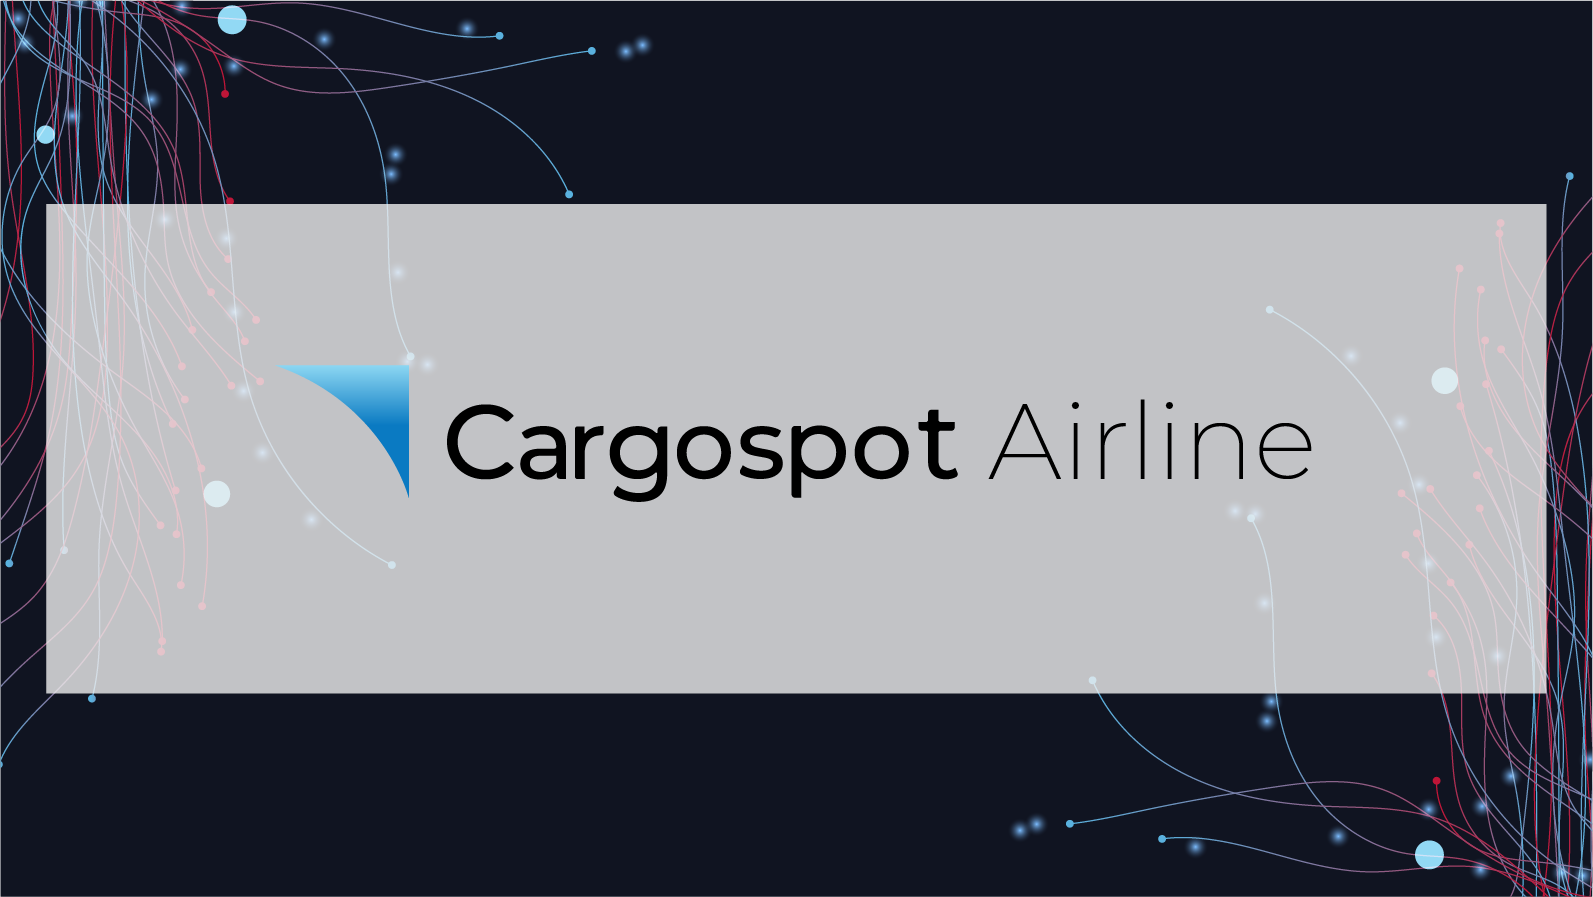 Download Banners_Cargospot Airline